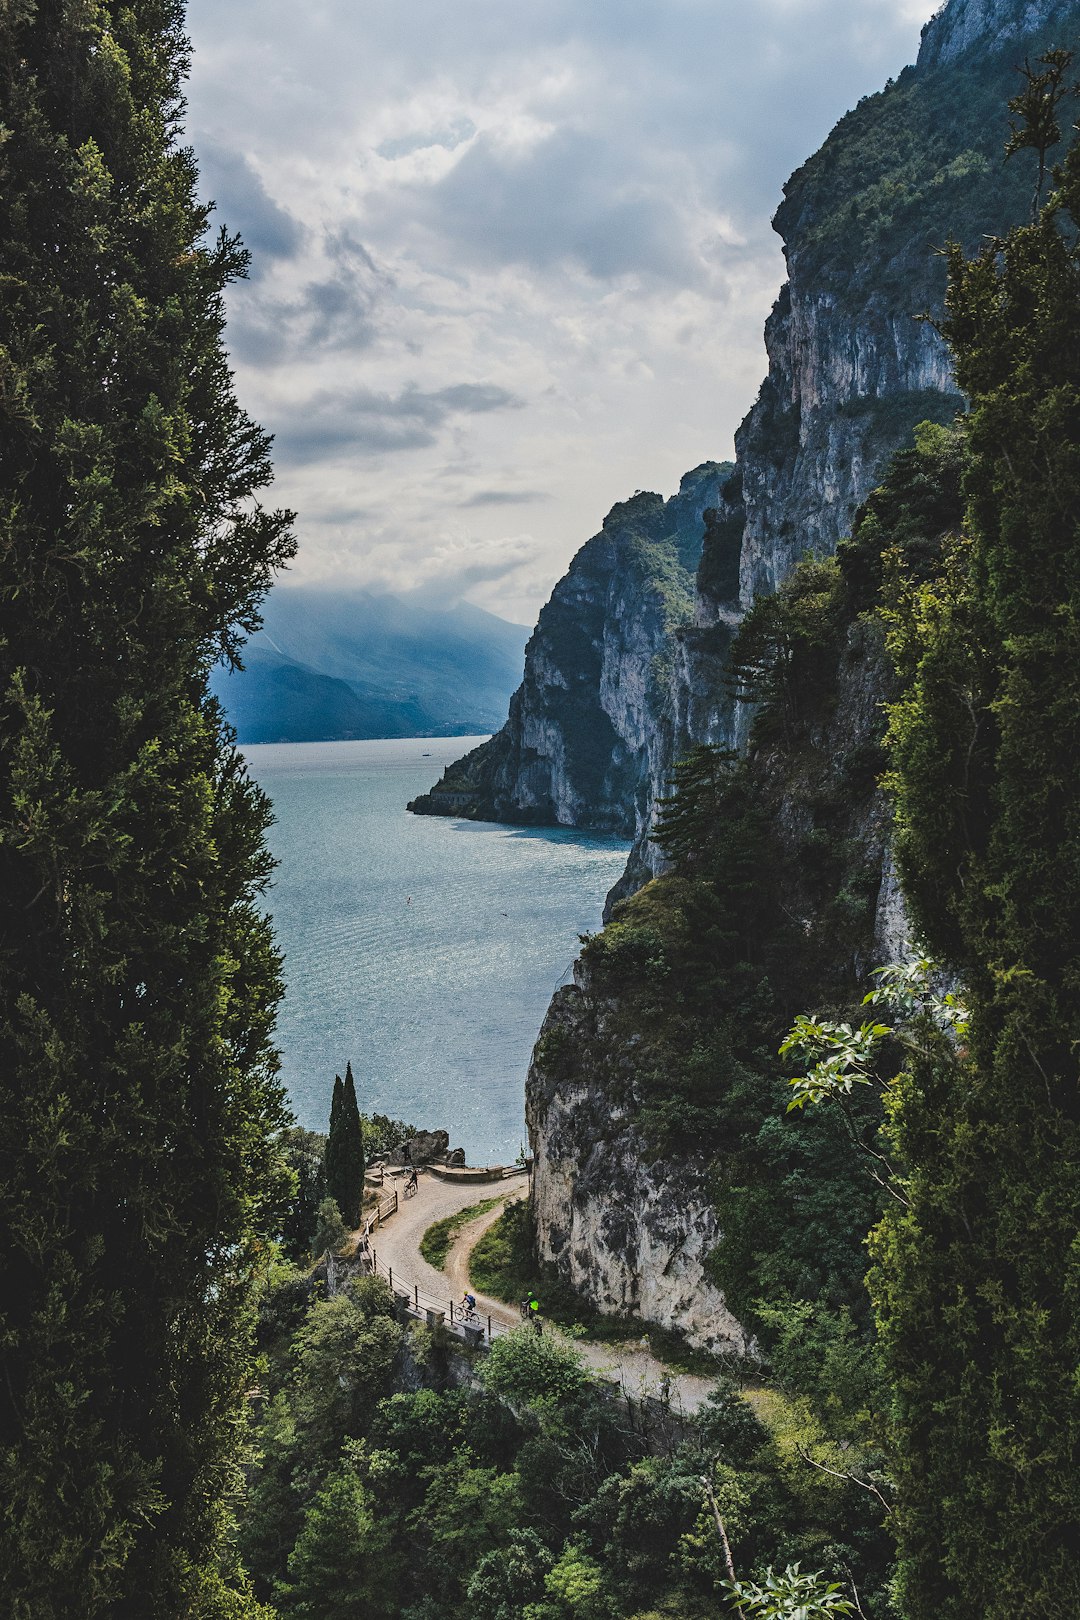 Travel Tips and Stories of Riva del Garda in Italy